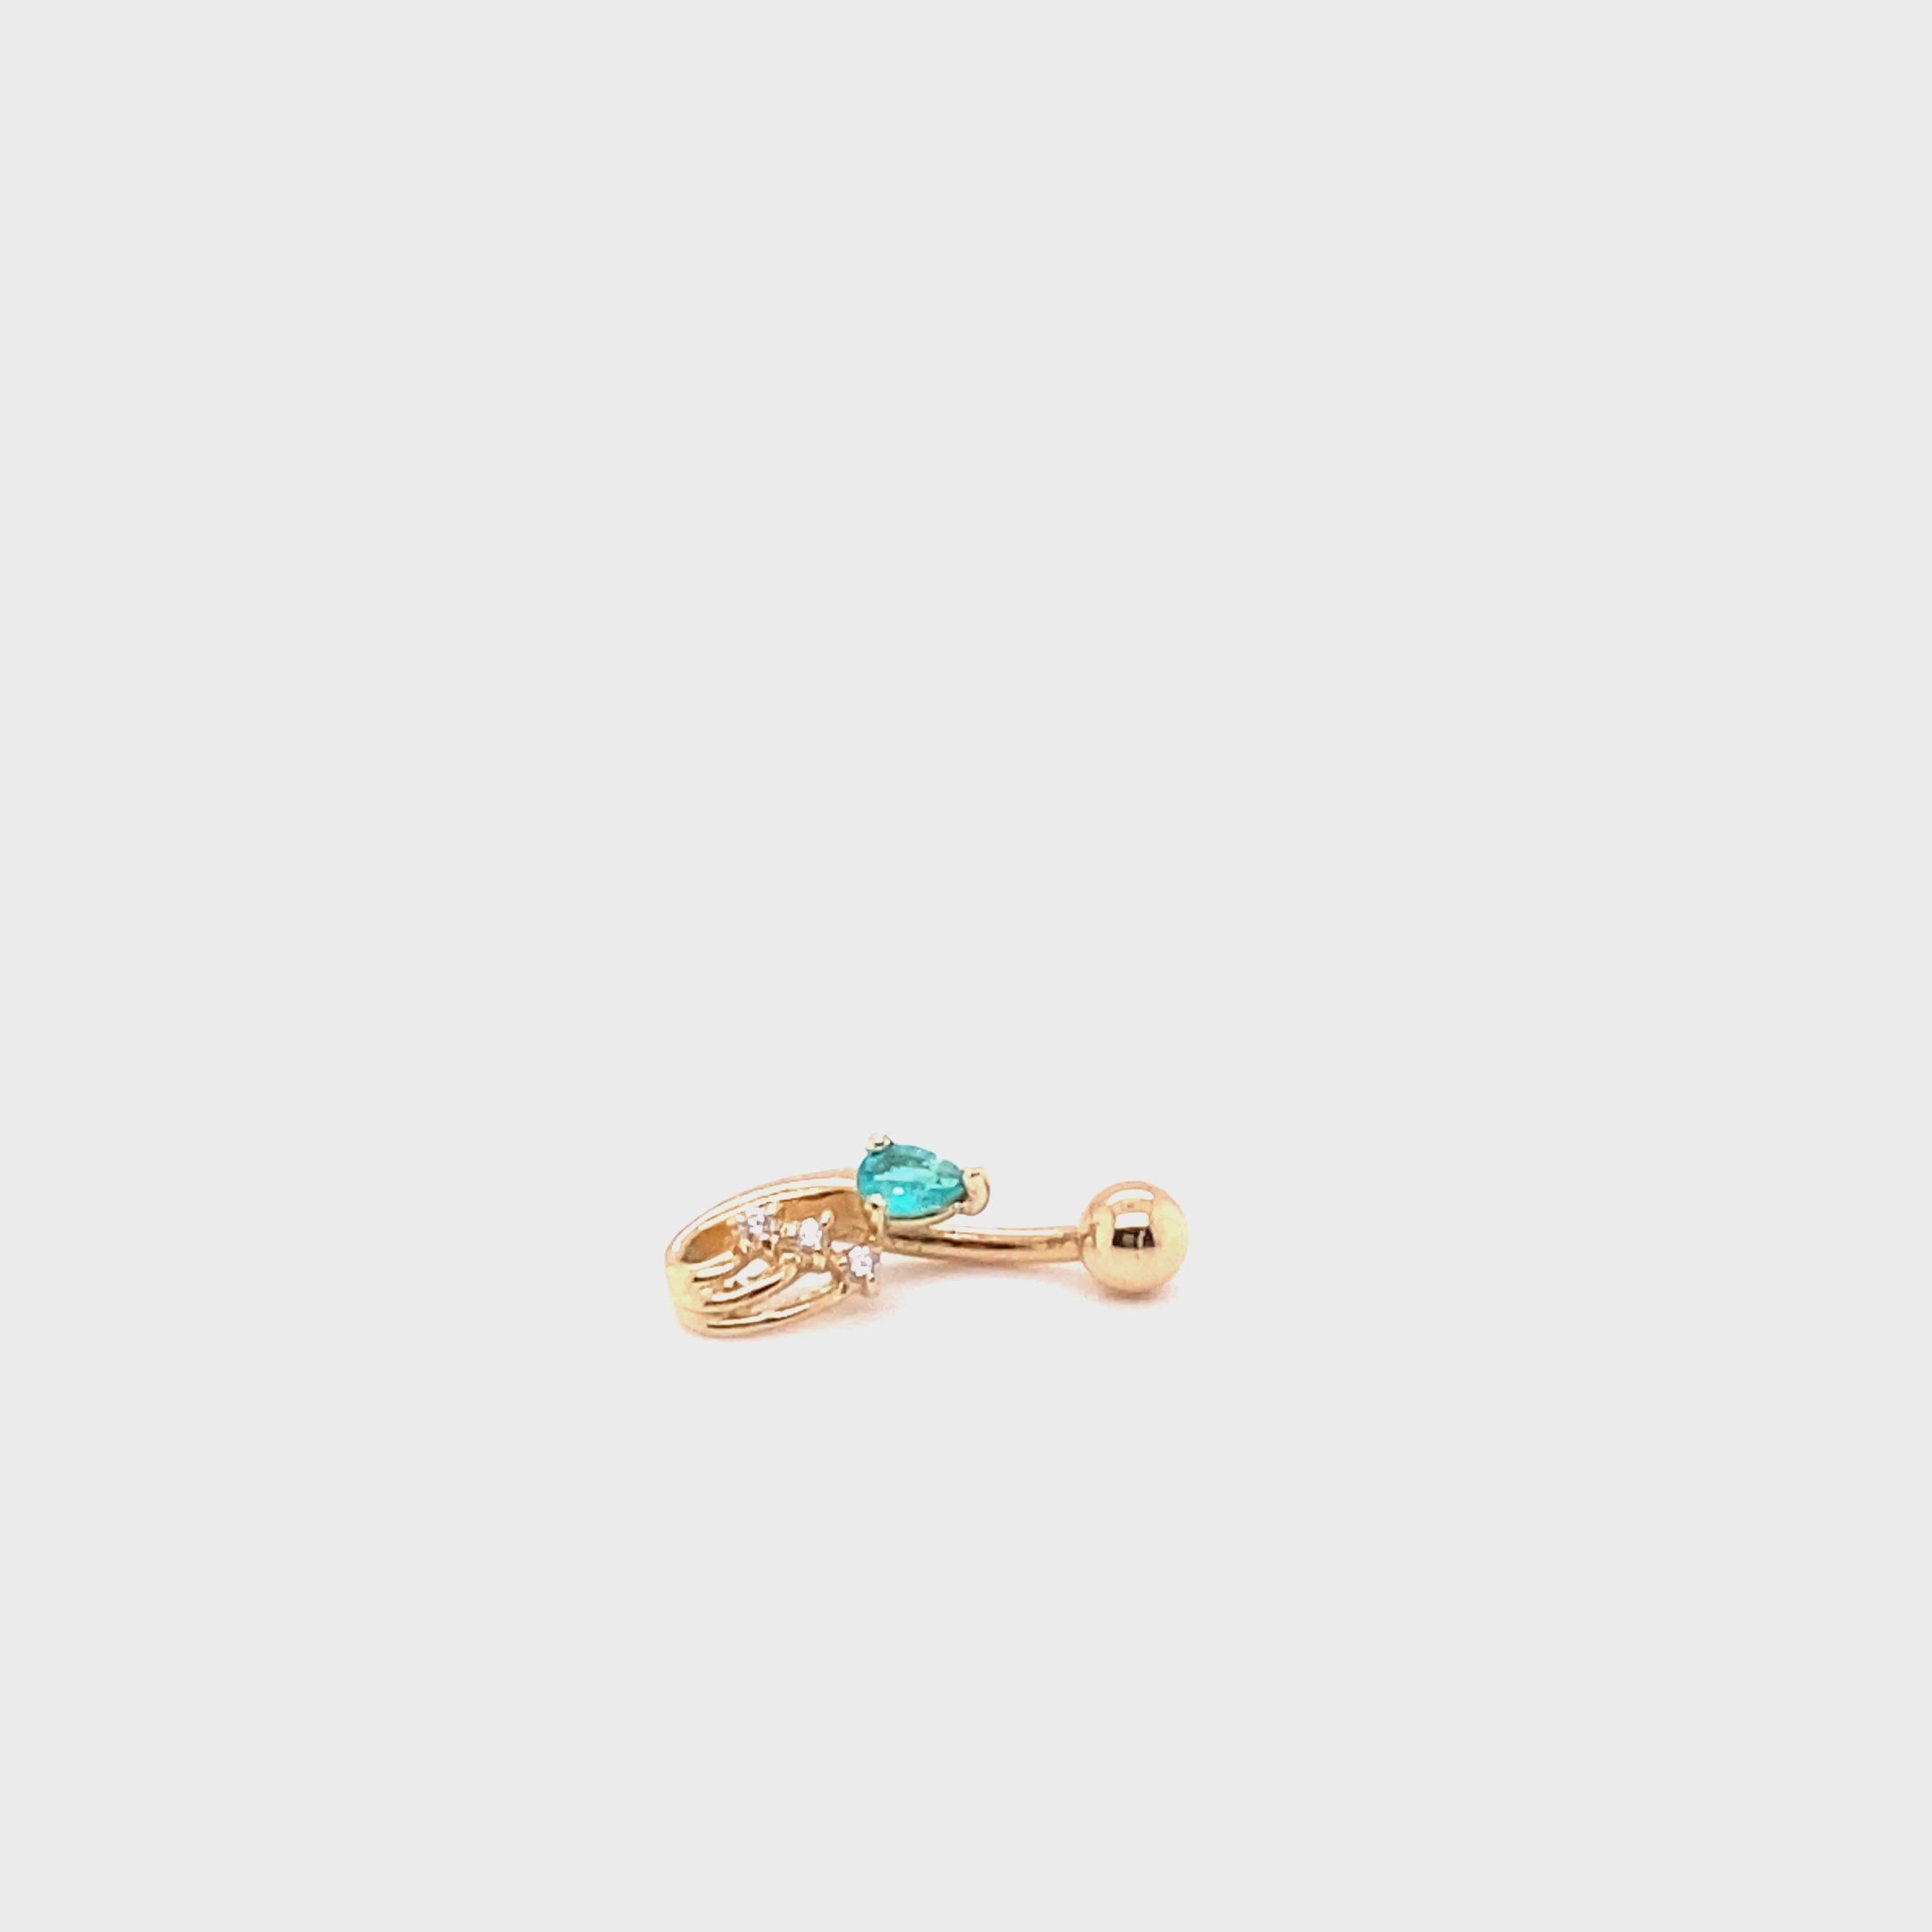 Natural Brazilian Paraiba Tourmaline & Diamond .22tcw Belly Button Ring 14K Solid Gold Navel Ring Belly Ring Body Jewelry Genuine Gemstone Estate Jewellery